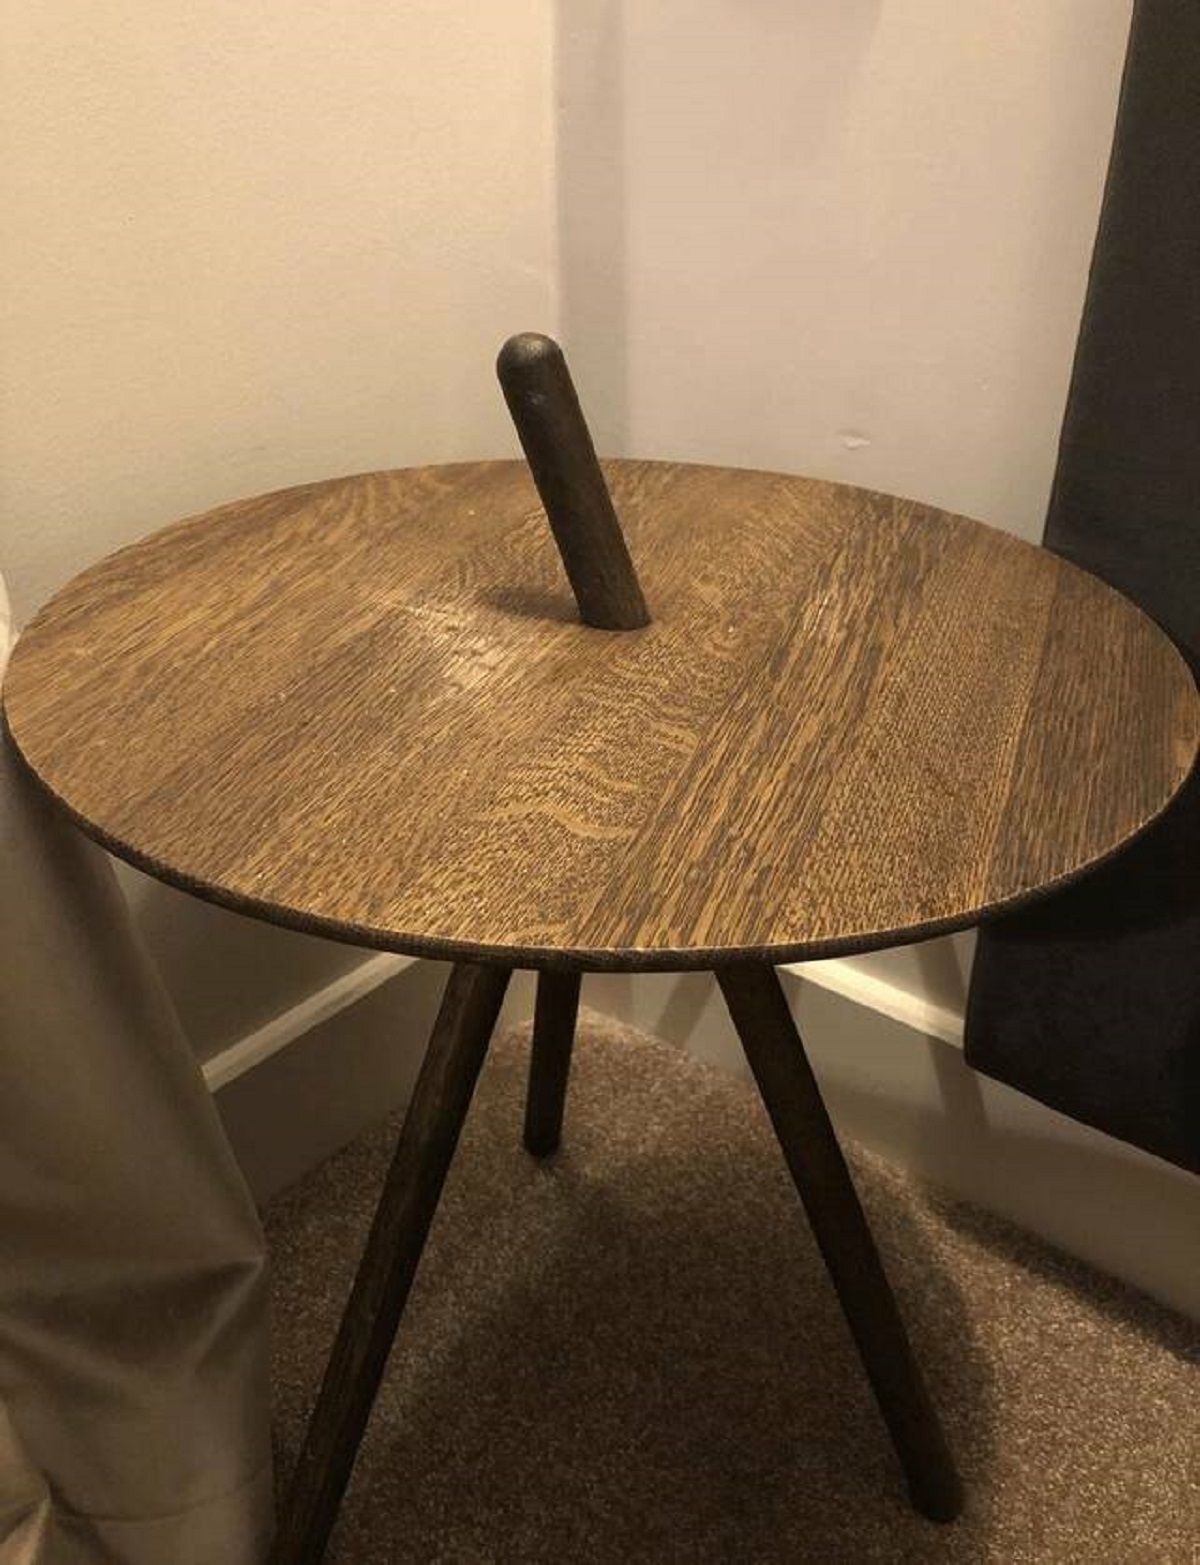 "This table has a suspicious extra appendage"